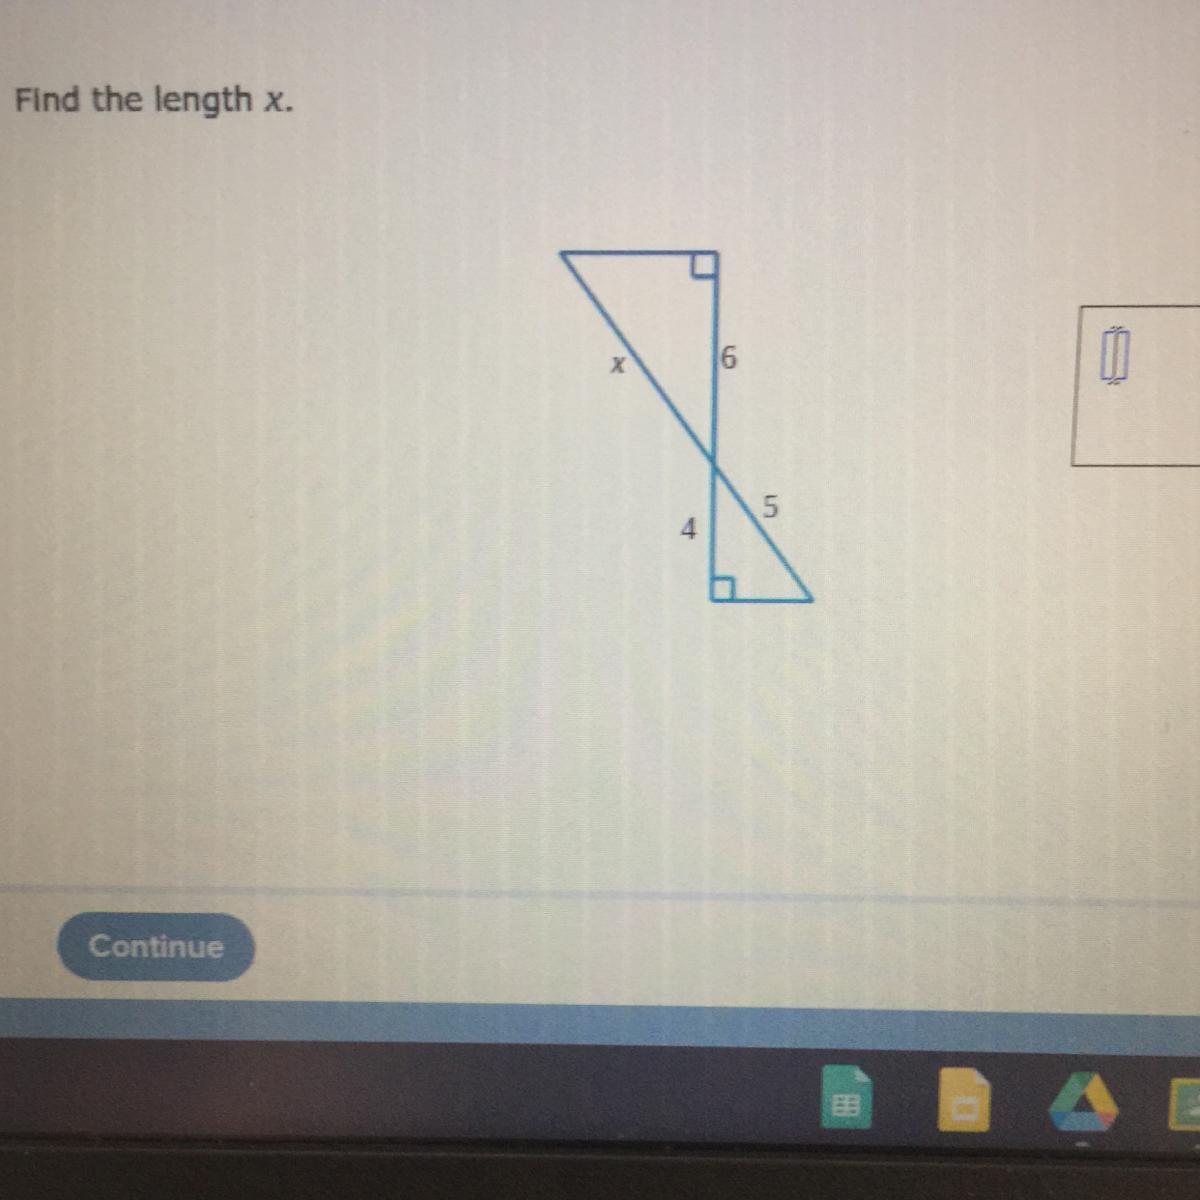 Does Anyone Know How To Solve This Problem?